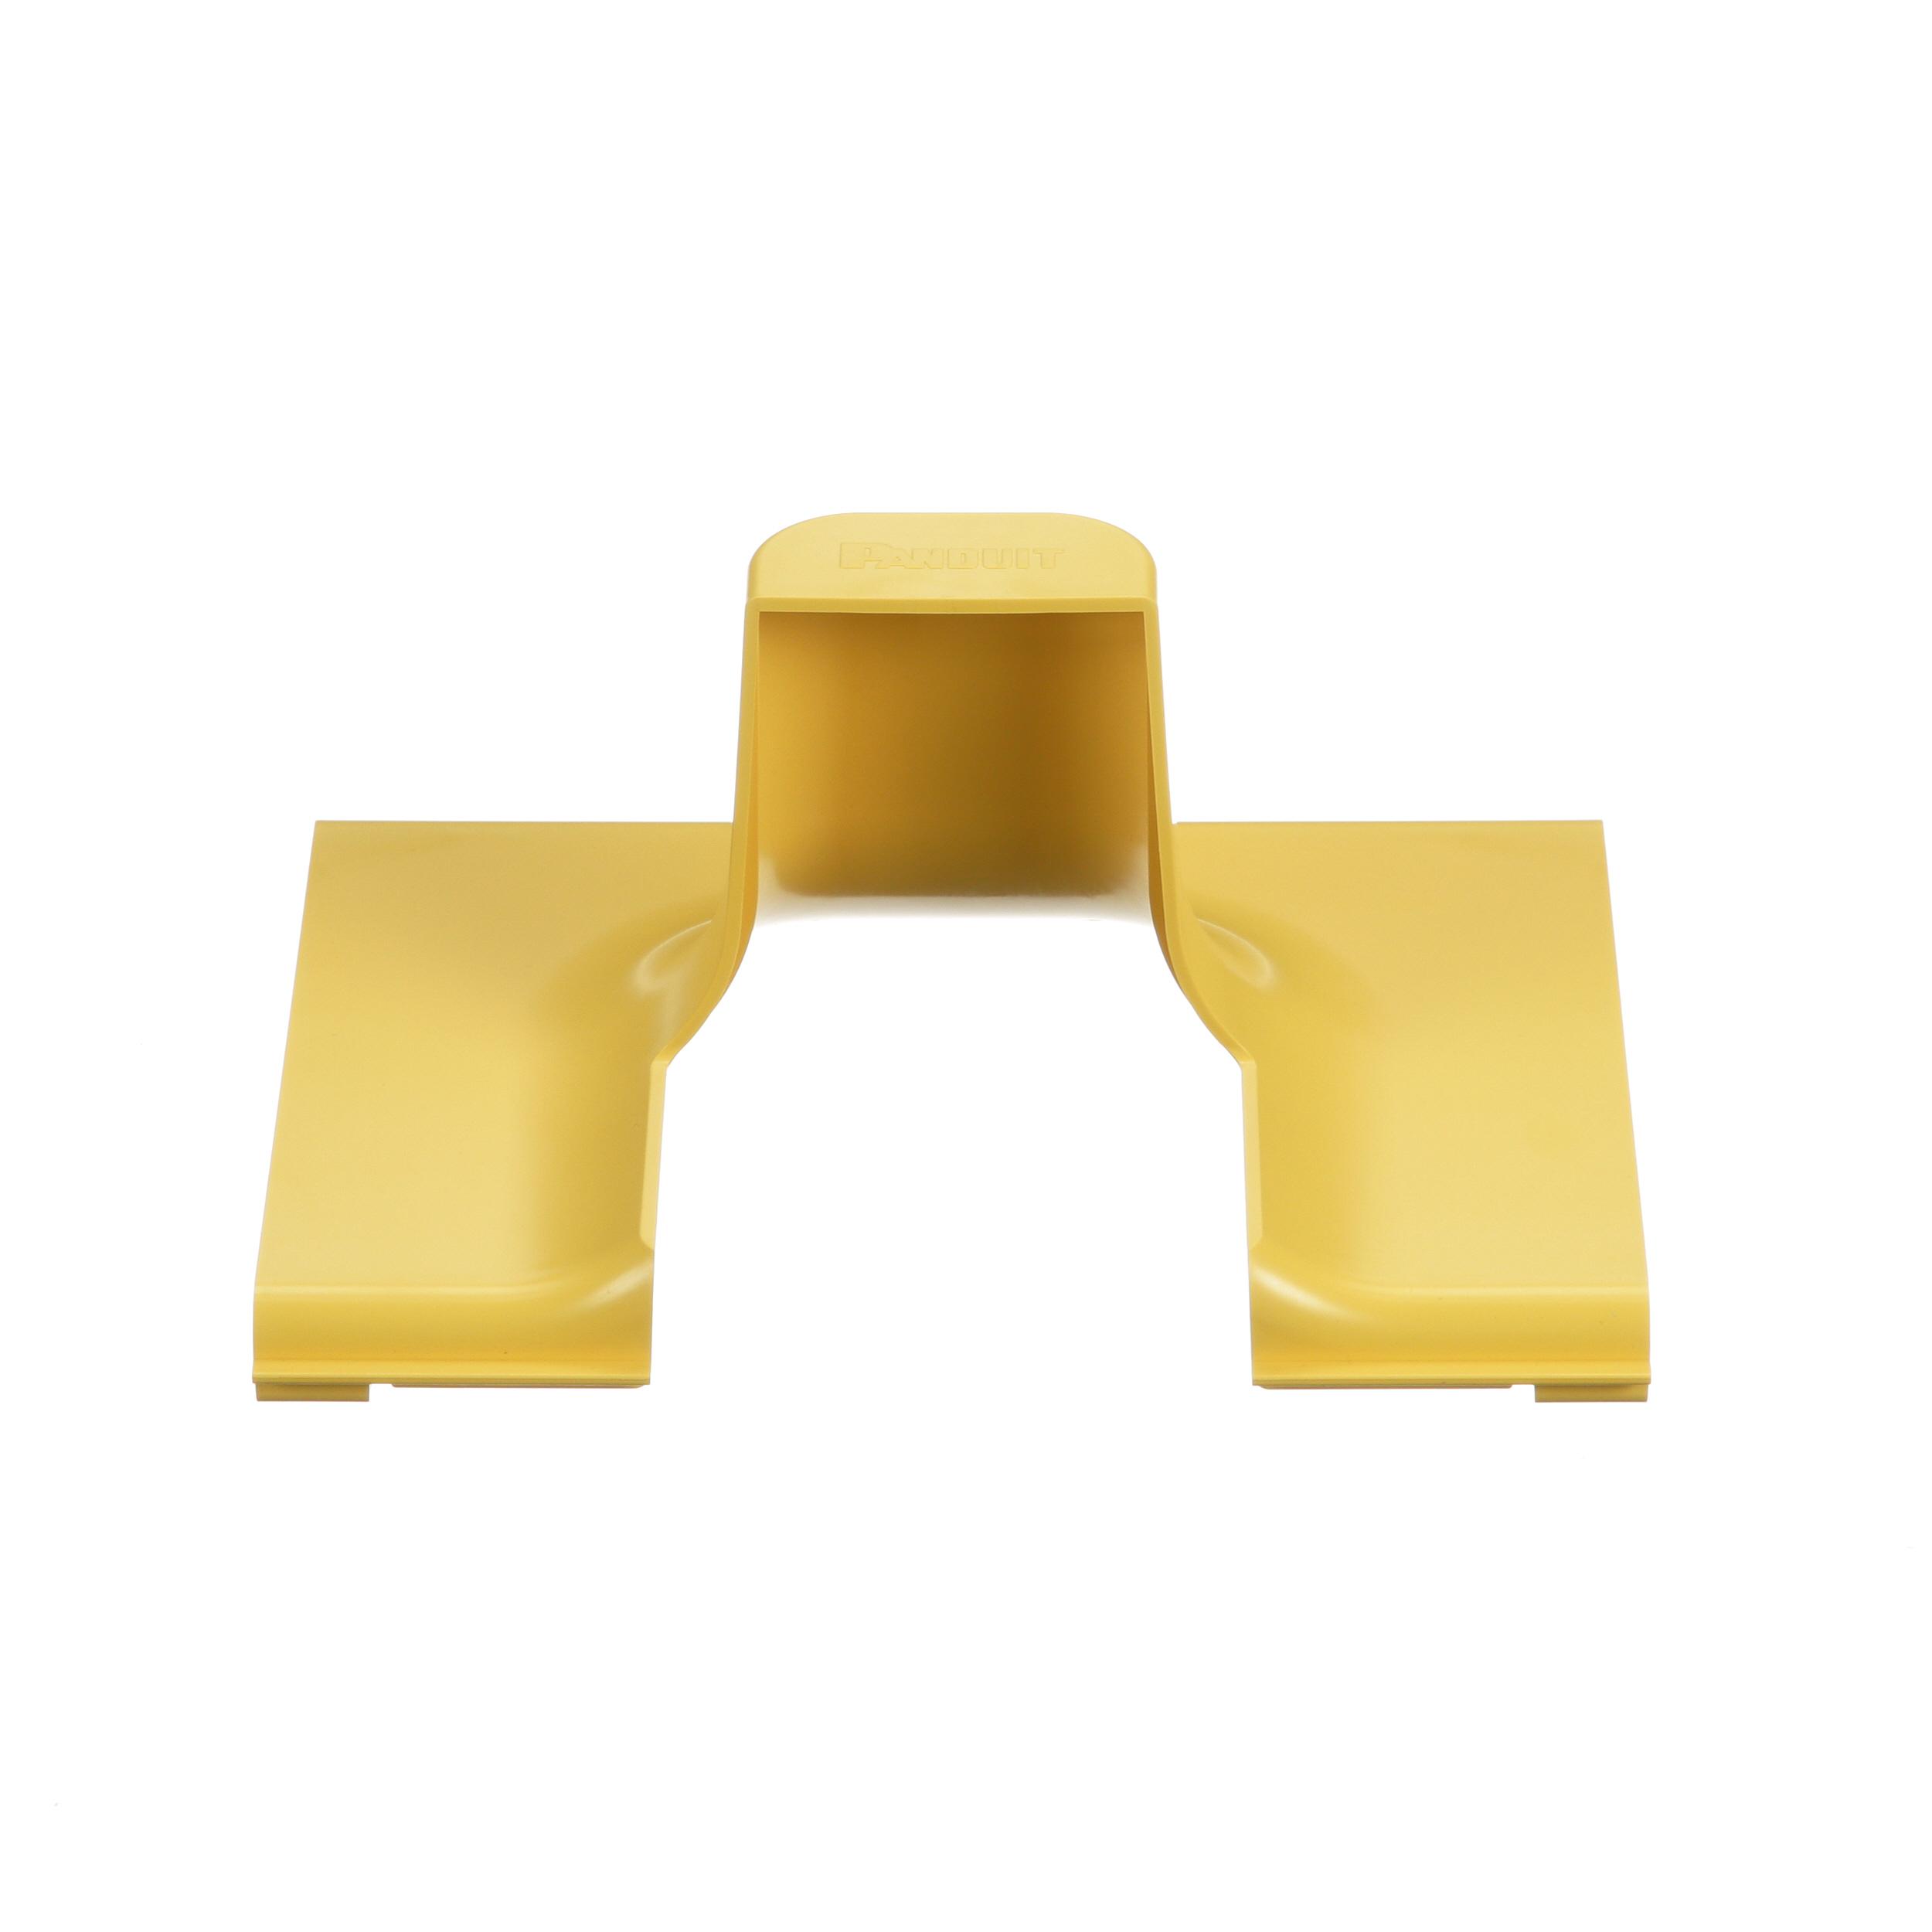 Panduit FRSPJC26YL DUCT FIBER-DUCTSPILLOVER JUNCTION COVER 6 X 4ABS YELLOW ROHS